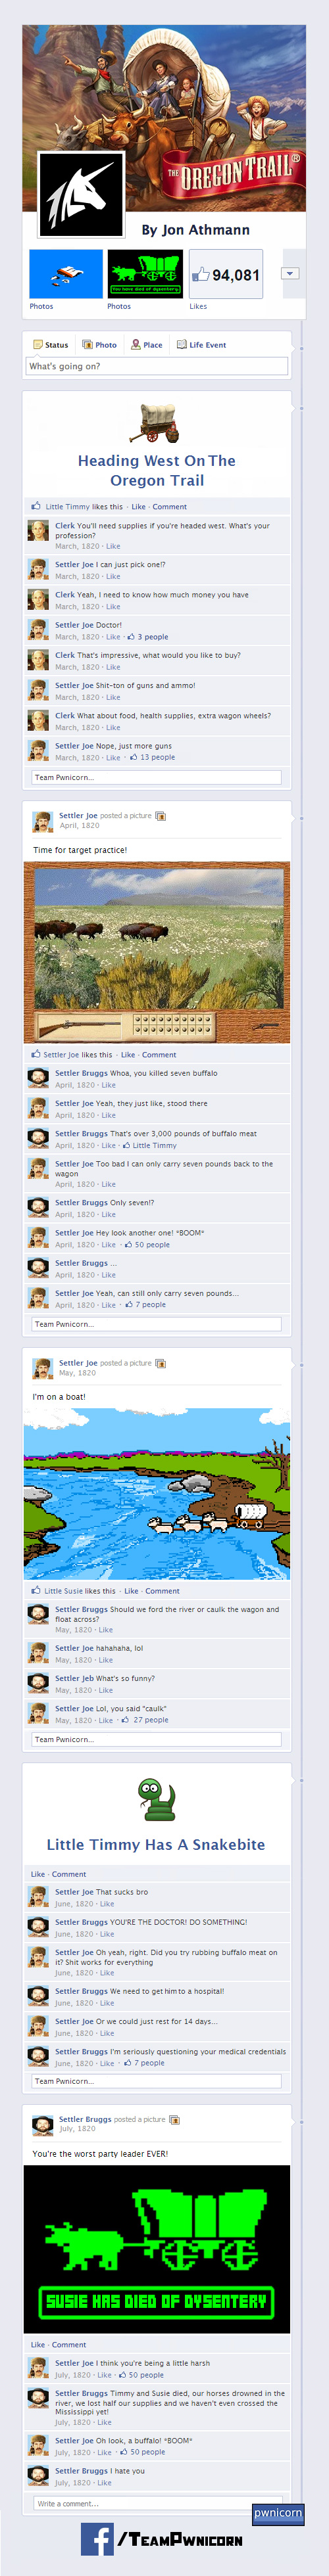 The Oregon Trail on Facebook